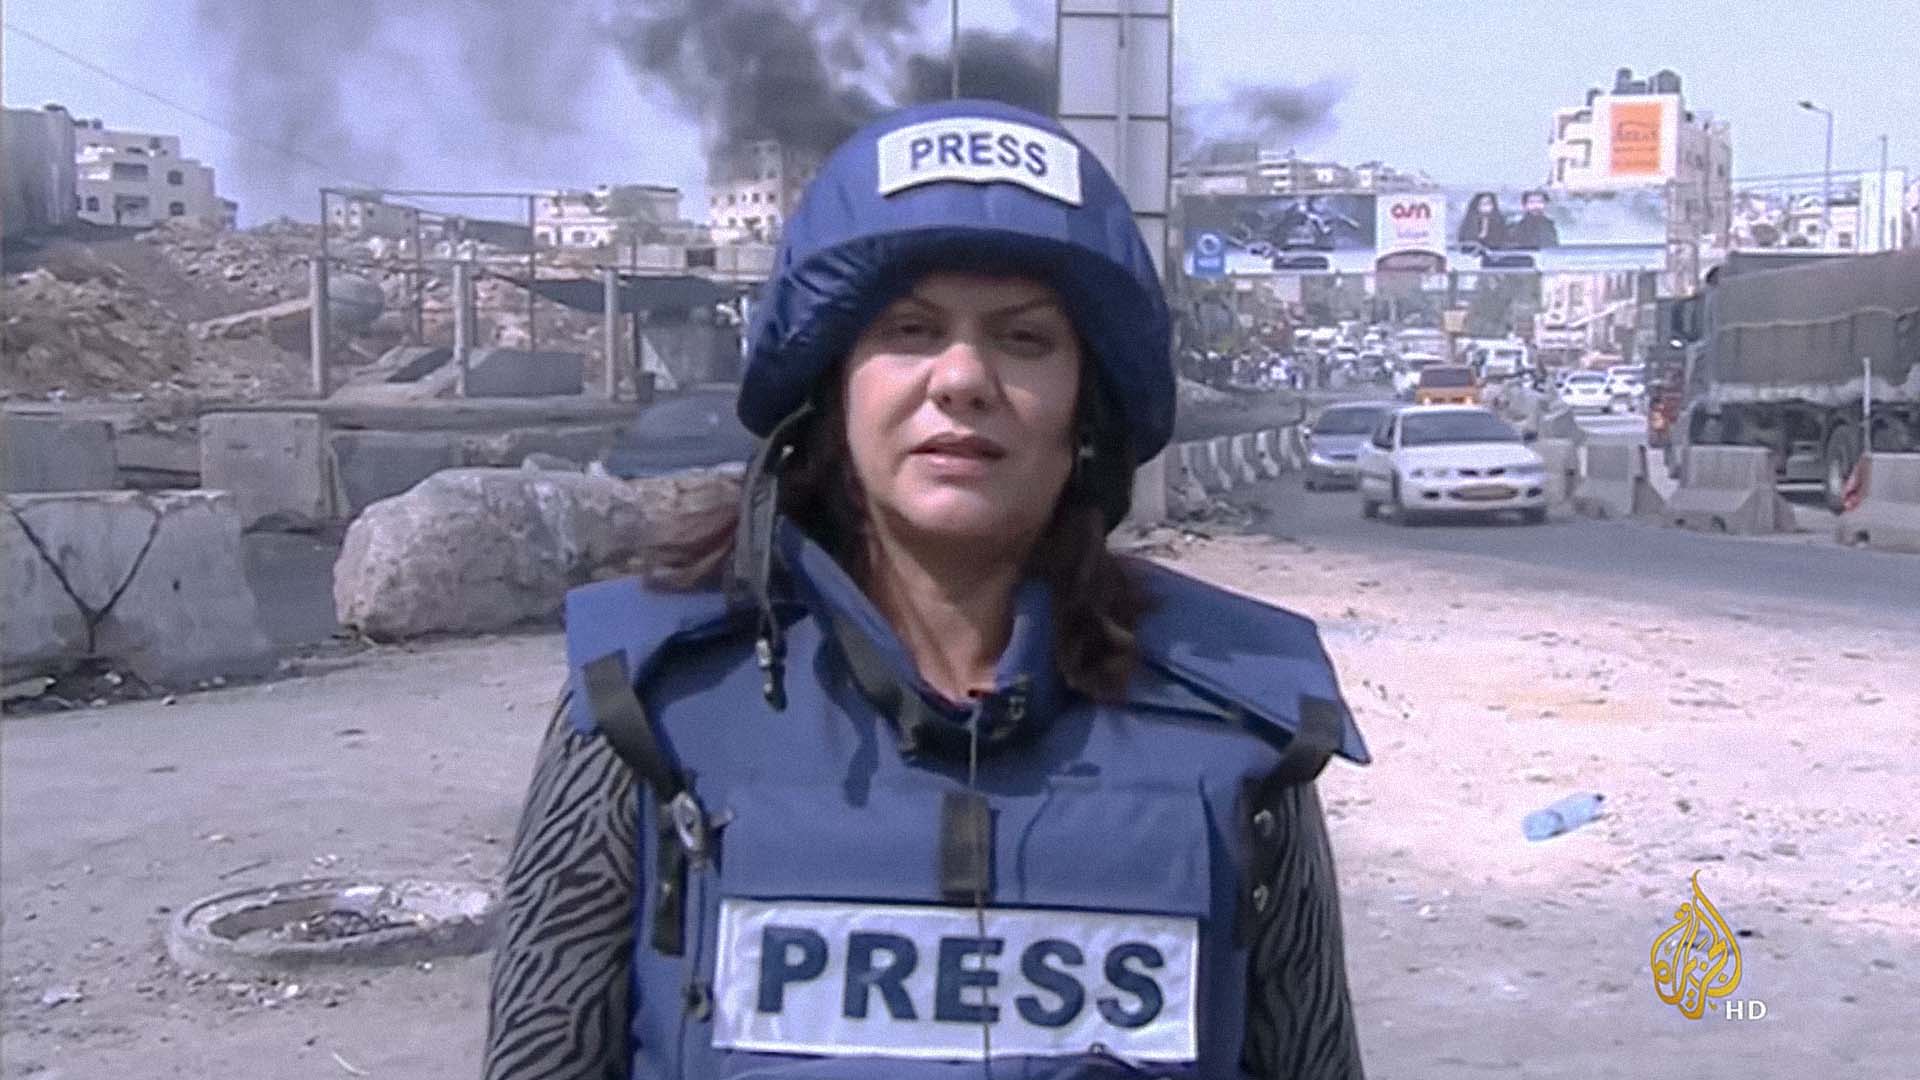 Israeli forces neutralise Palestinian journalist threatening to blow up public opinion with a press vest image